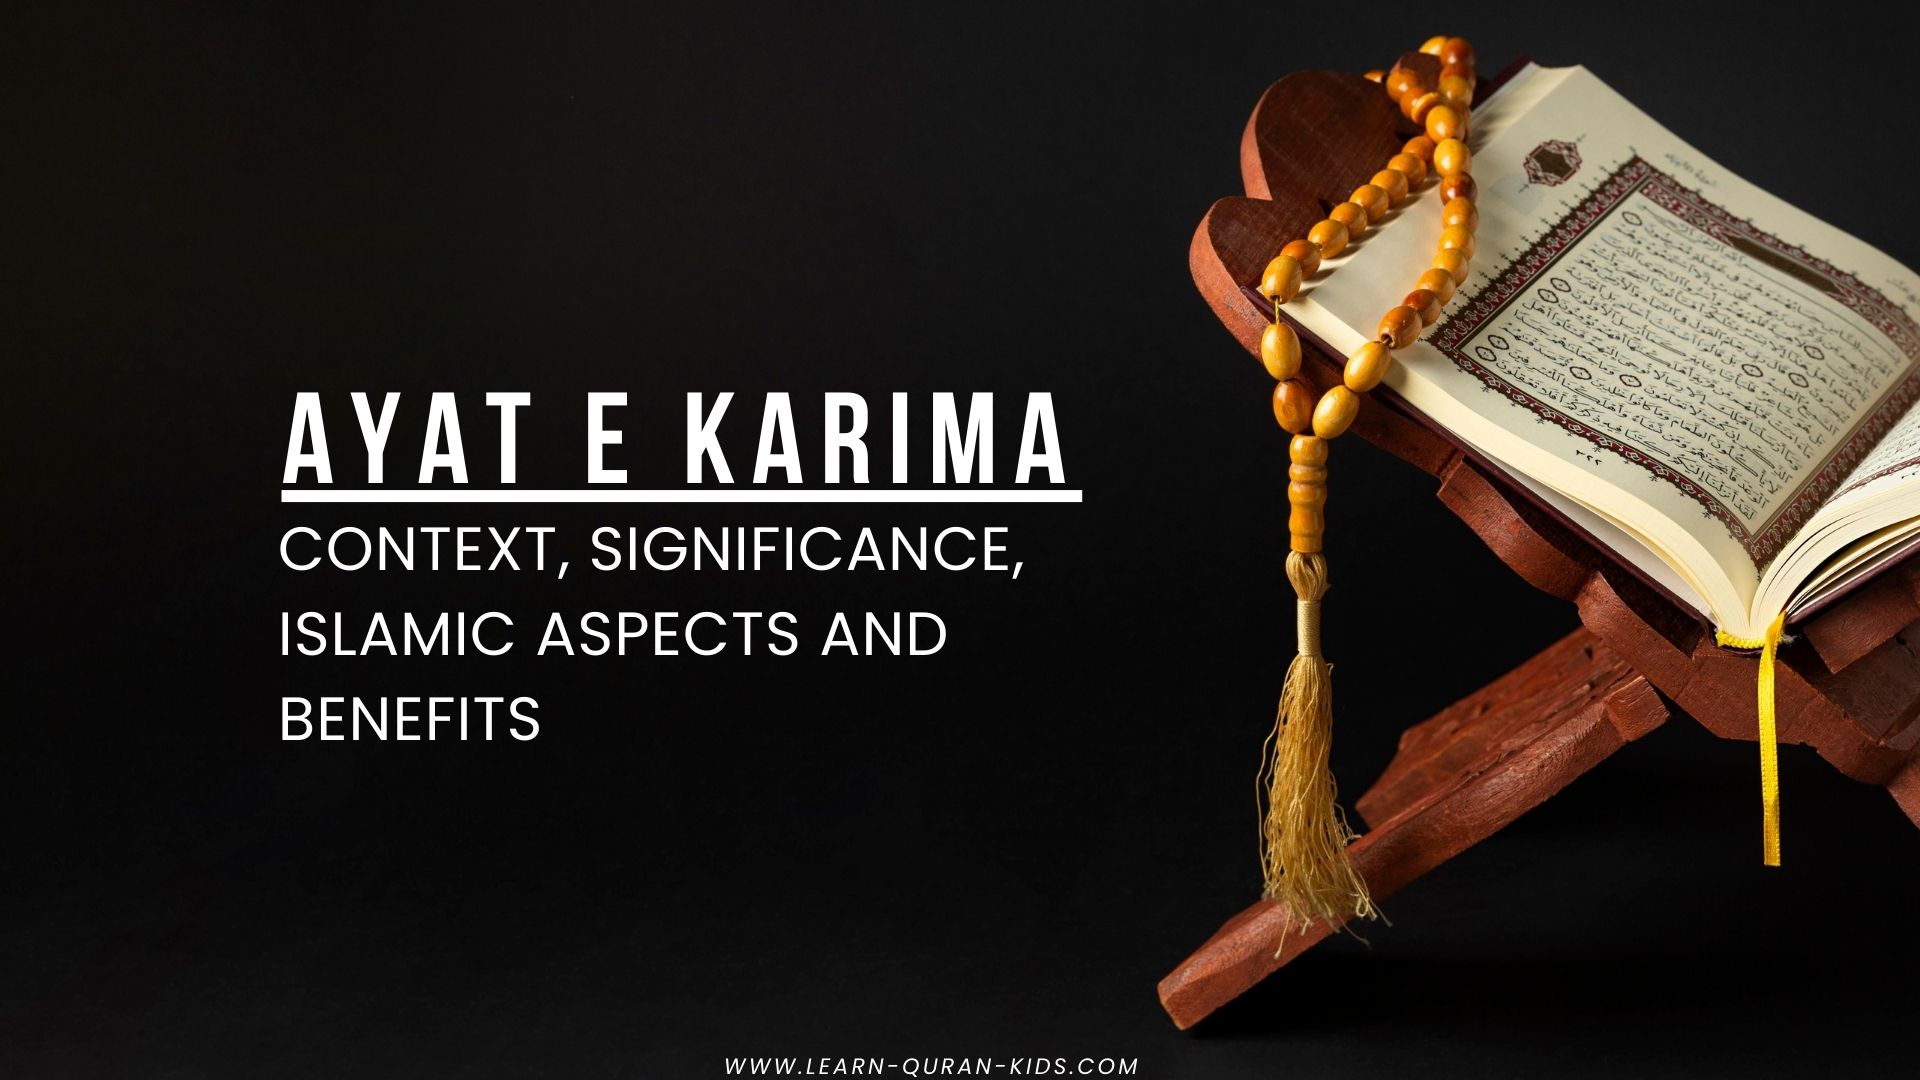 You are currently viewing Ayat e Karima Context, Significance, Islamic Aspects and Benefits